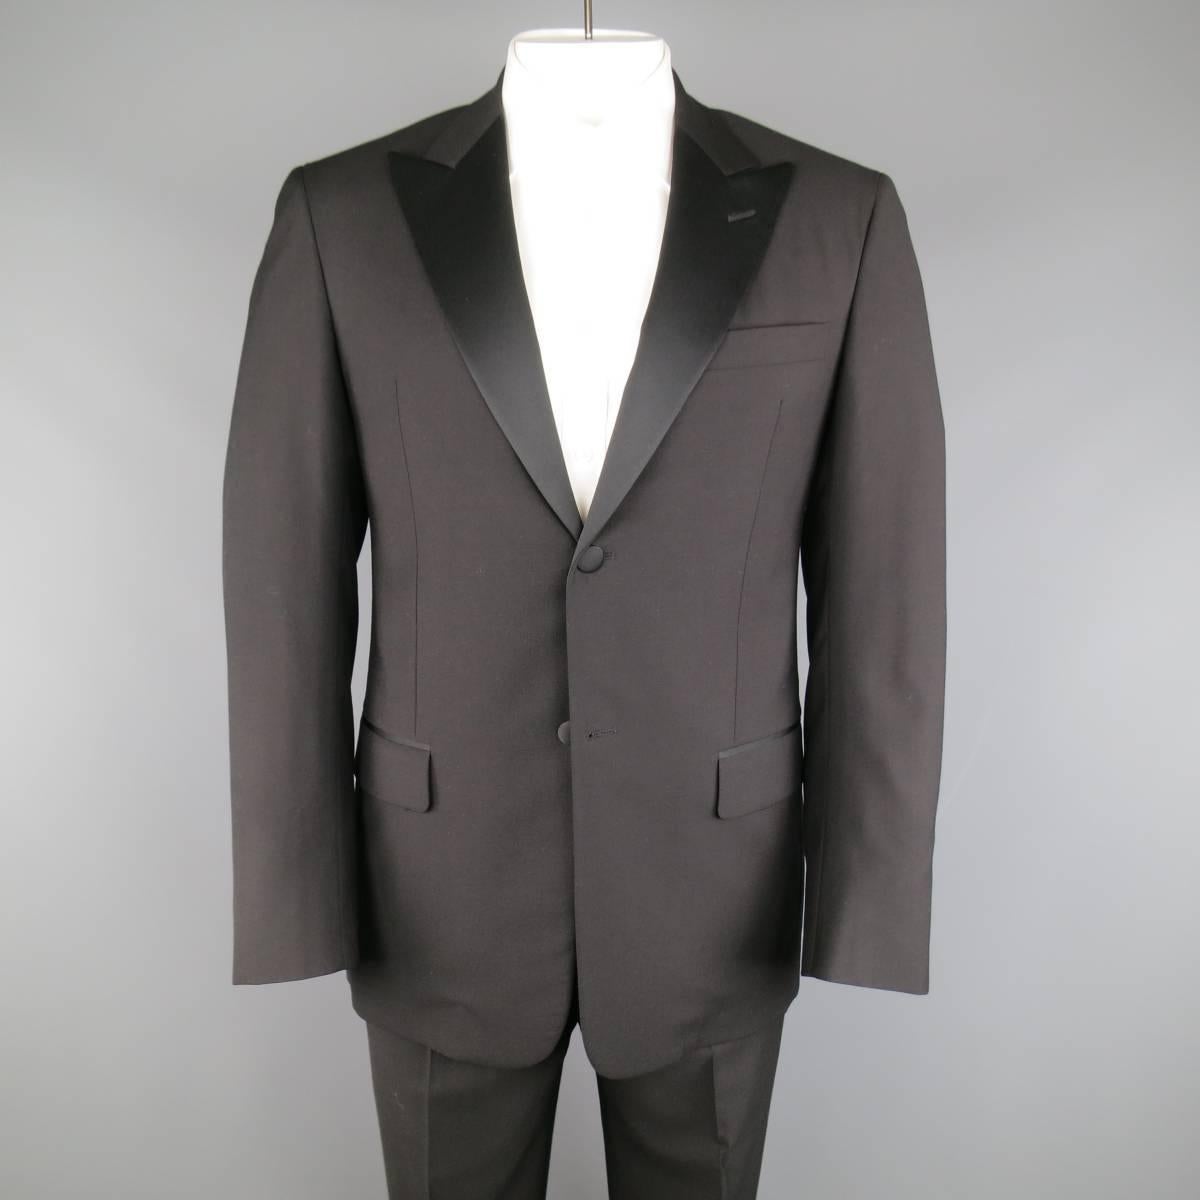 Classic VALENTINO tuxedo in a light weight black wool includes a two button jacket with half satin peak lapel and functional button cuffs with a matching pair of trousers with thick satin waistband and internal brace suspender buttons. Made in